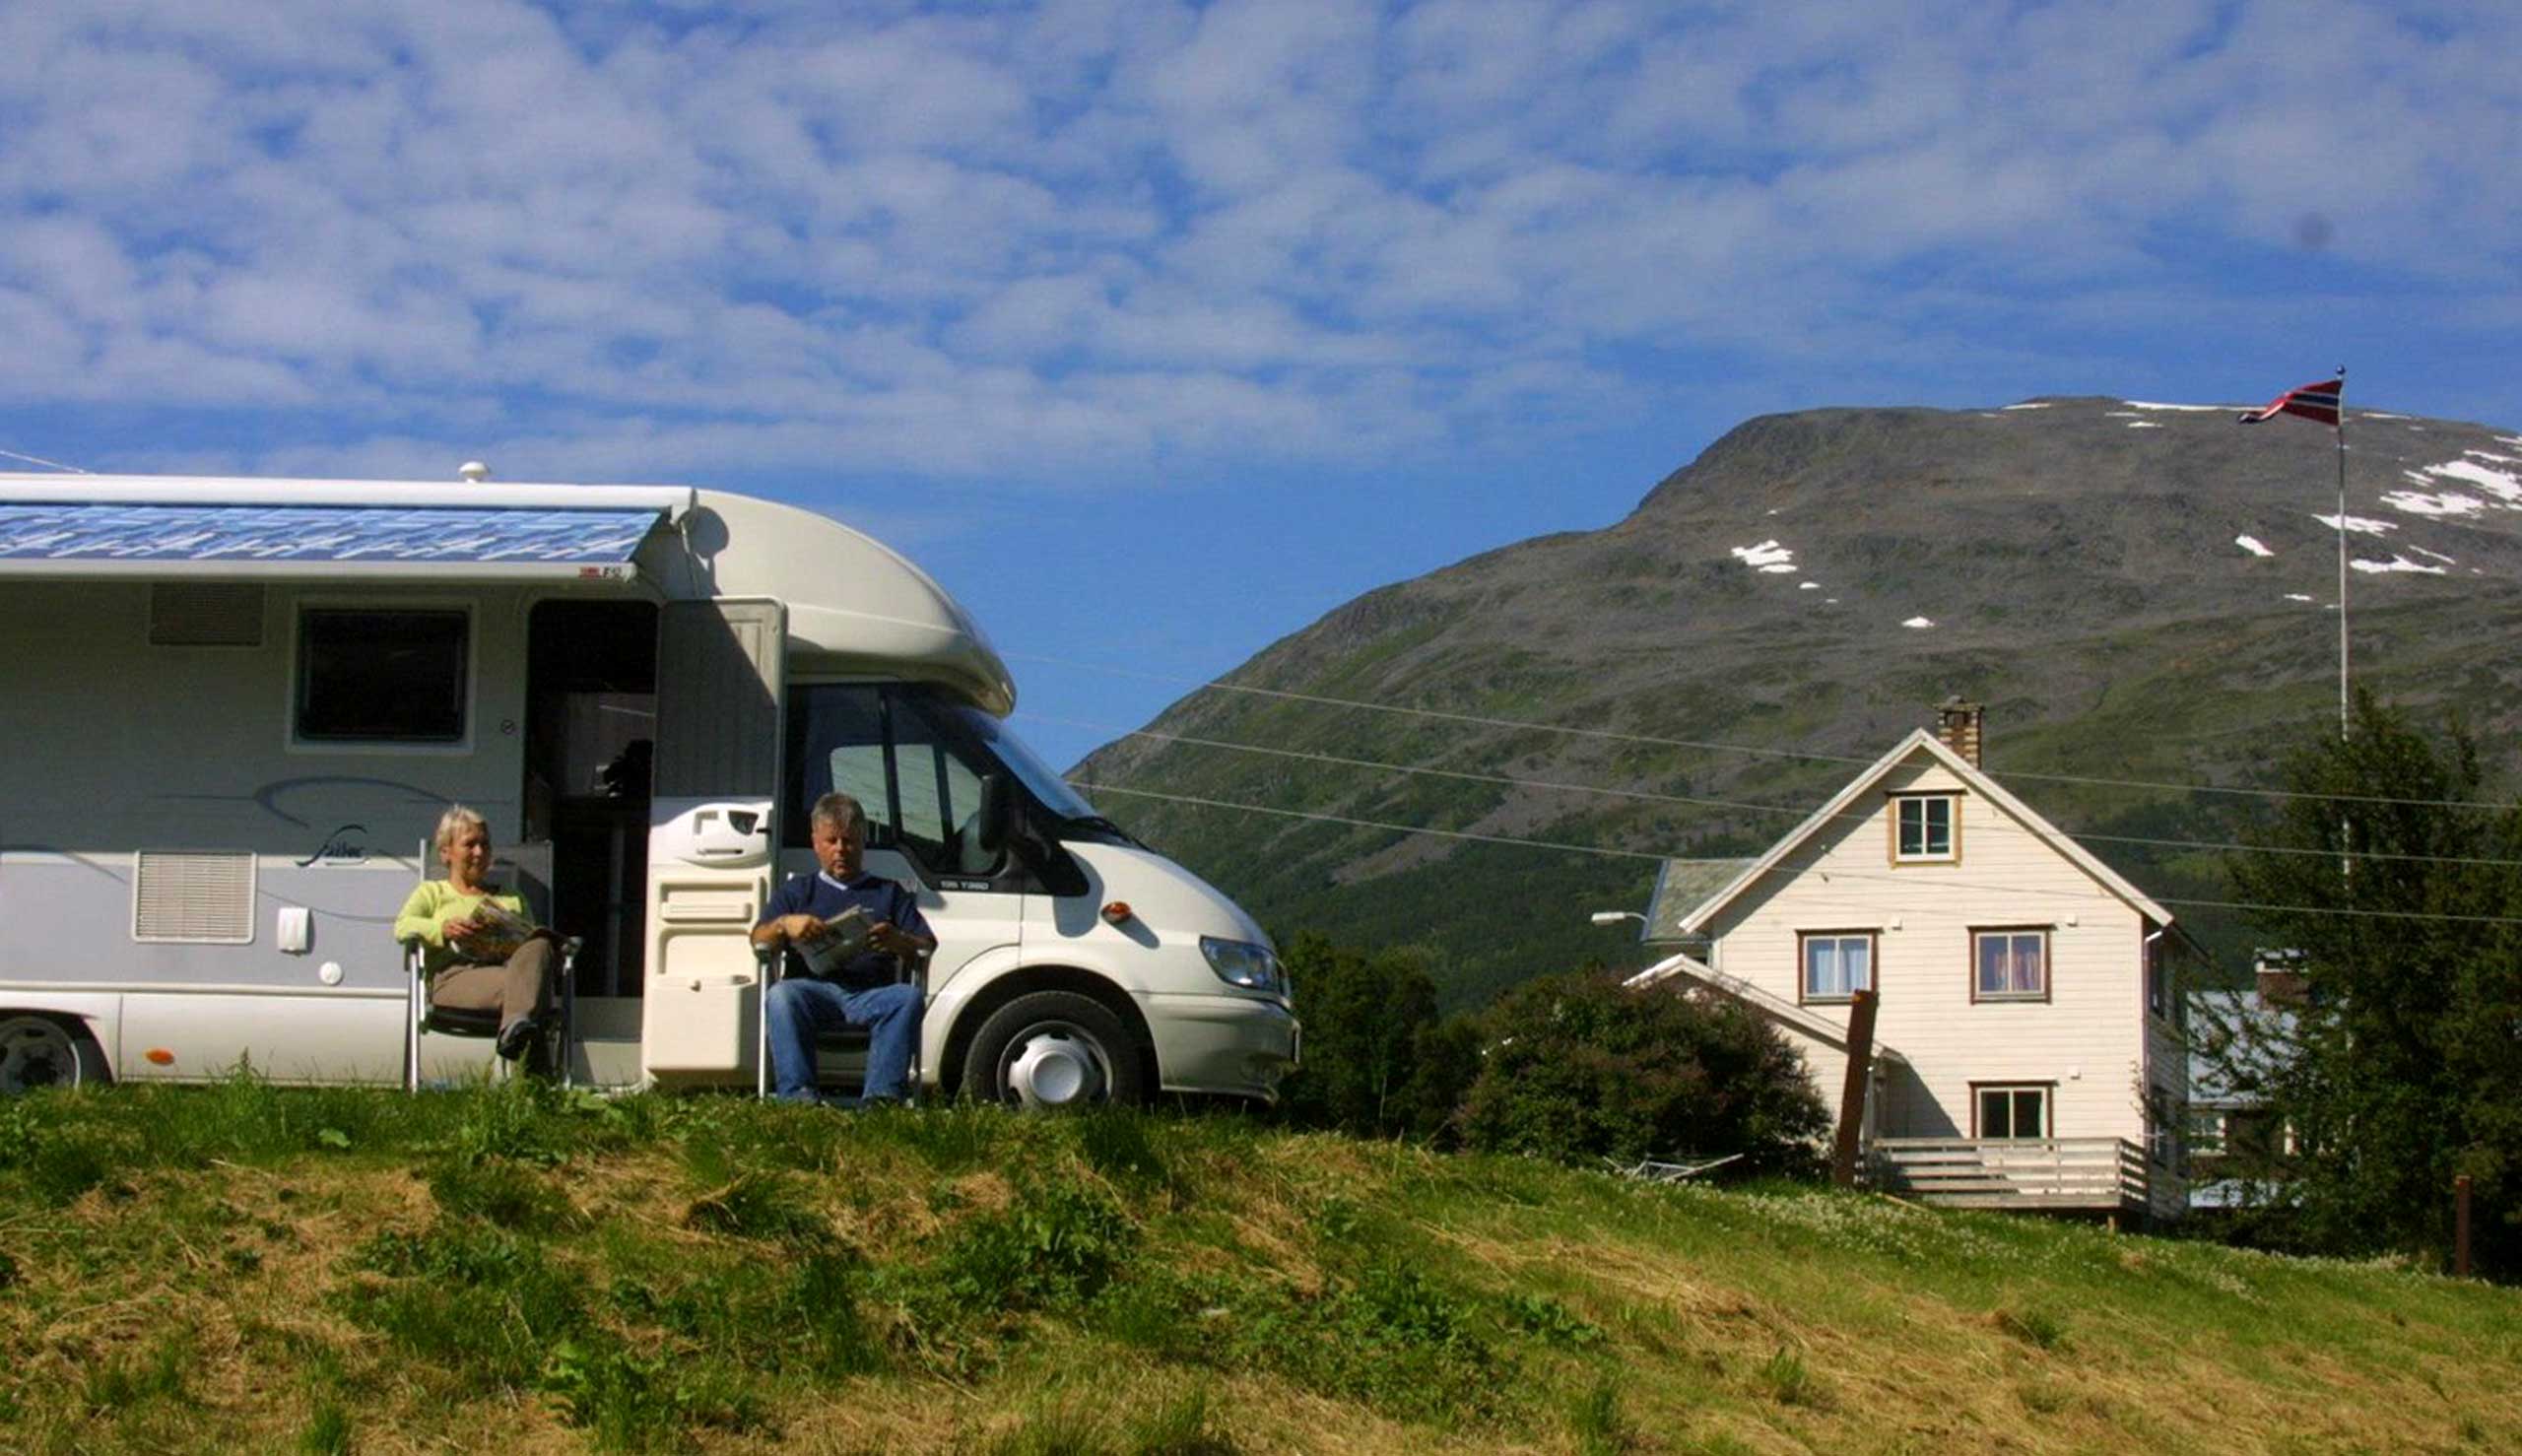 At Altafjord Camping, you are surrounded by beautiful nature. Copyright: Altafjord Camping